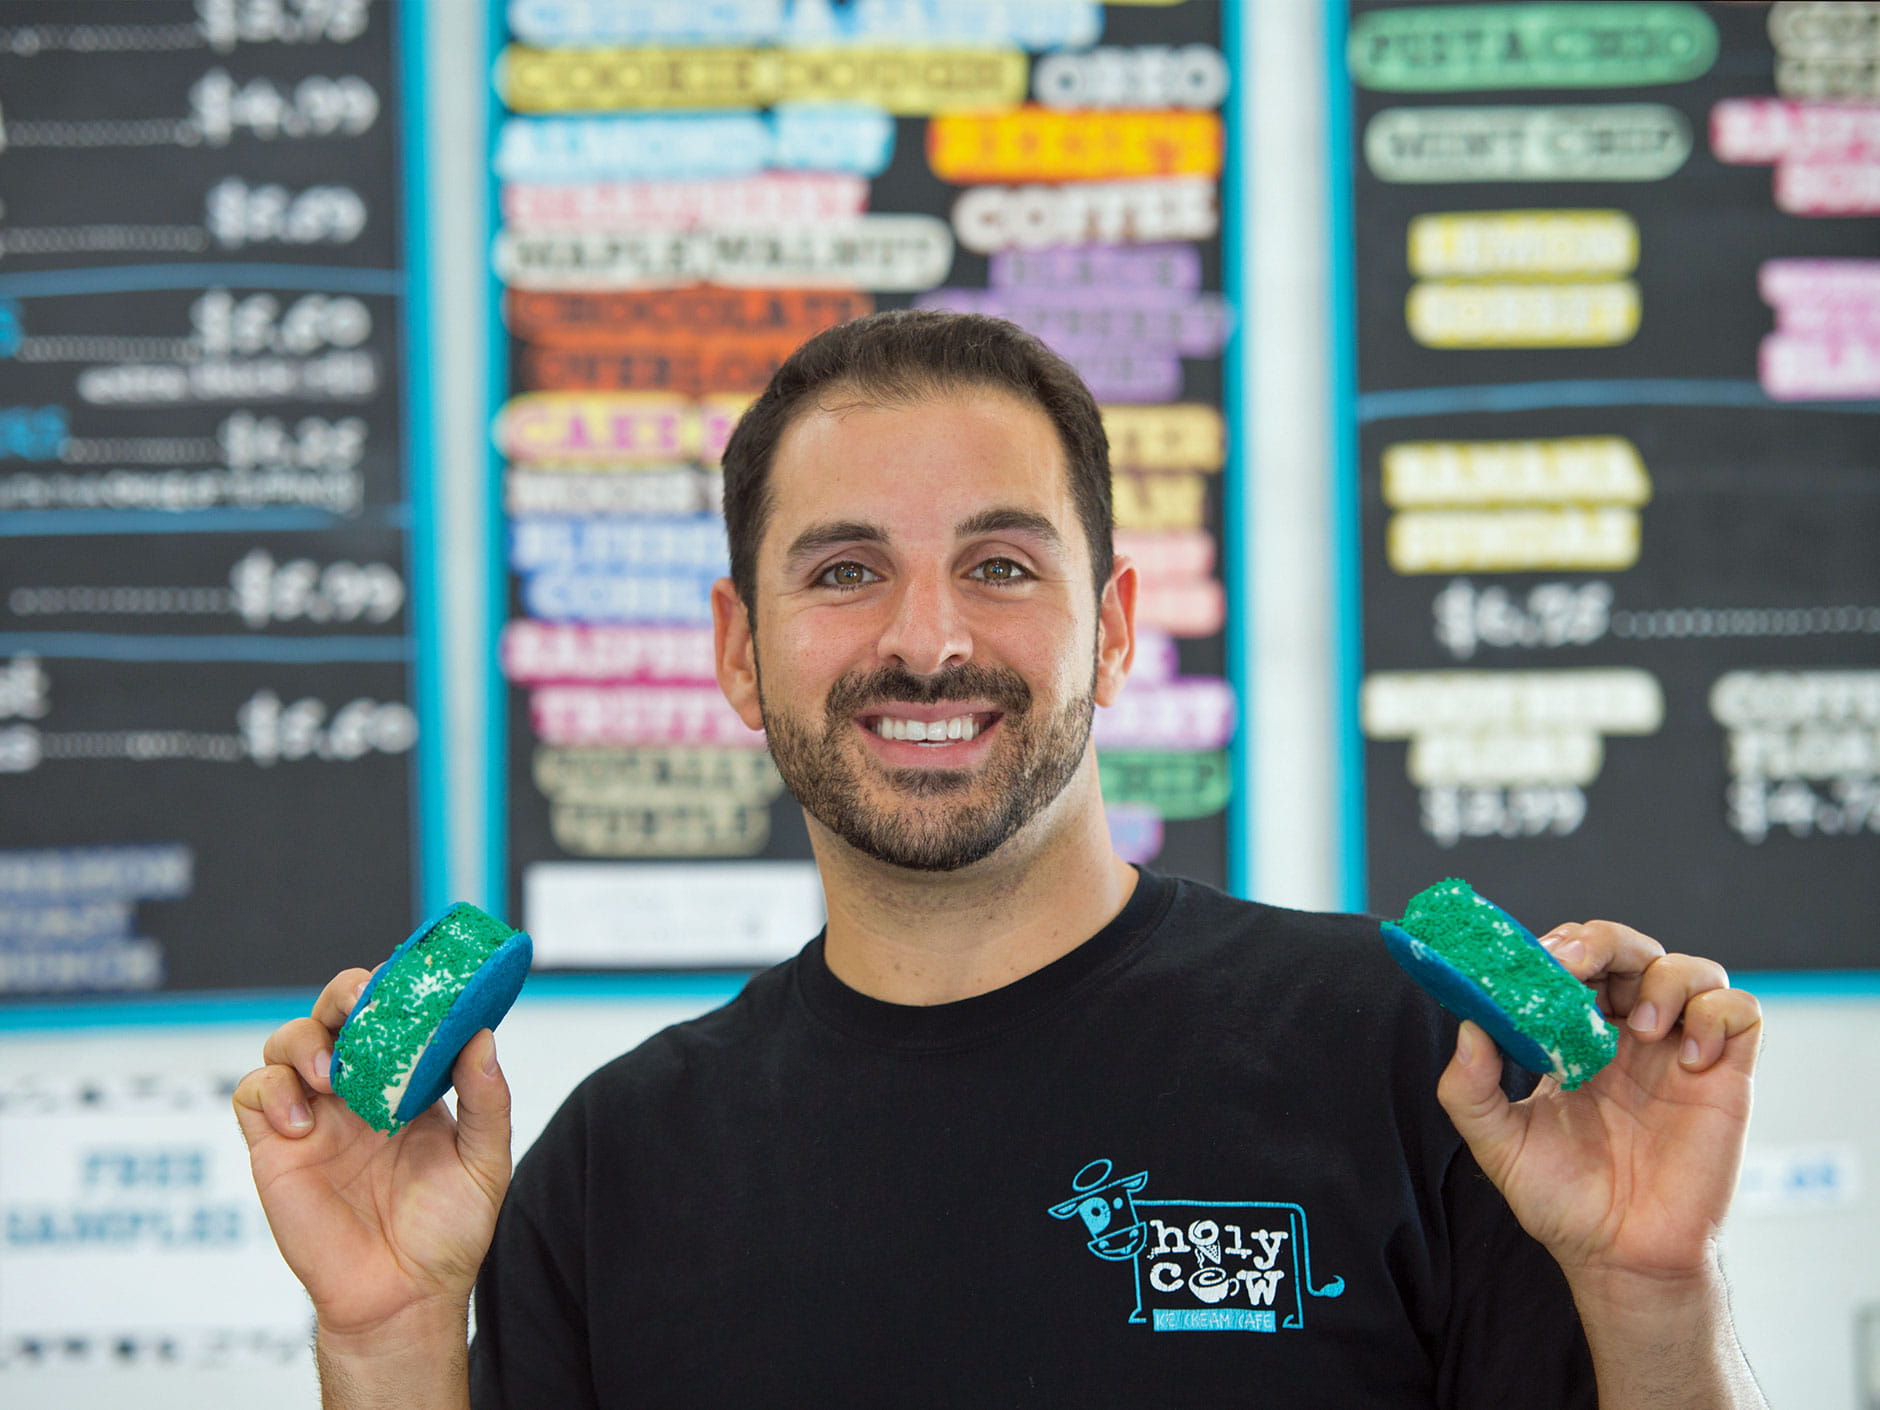 Mike Schifino ’09, owner of Holy Cow Ice Cream Cafe